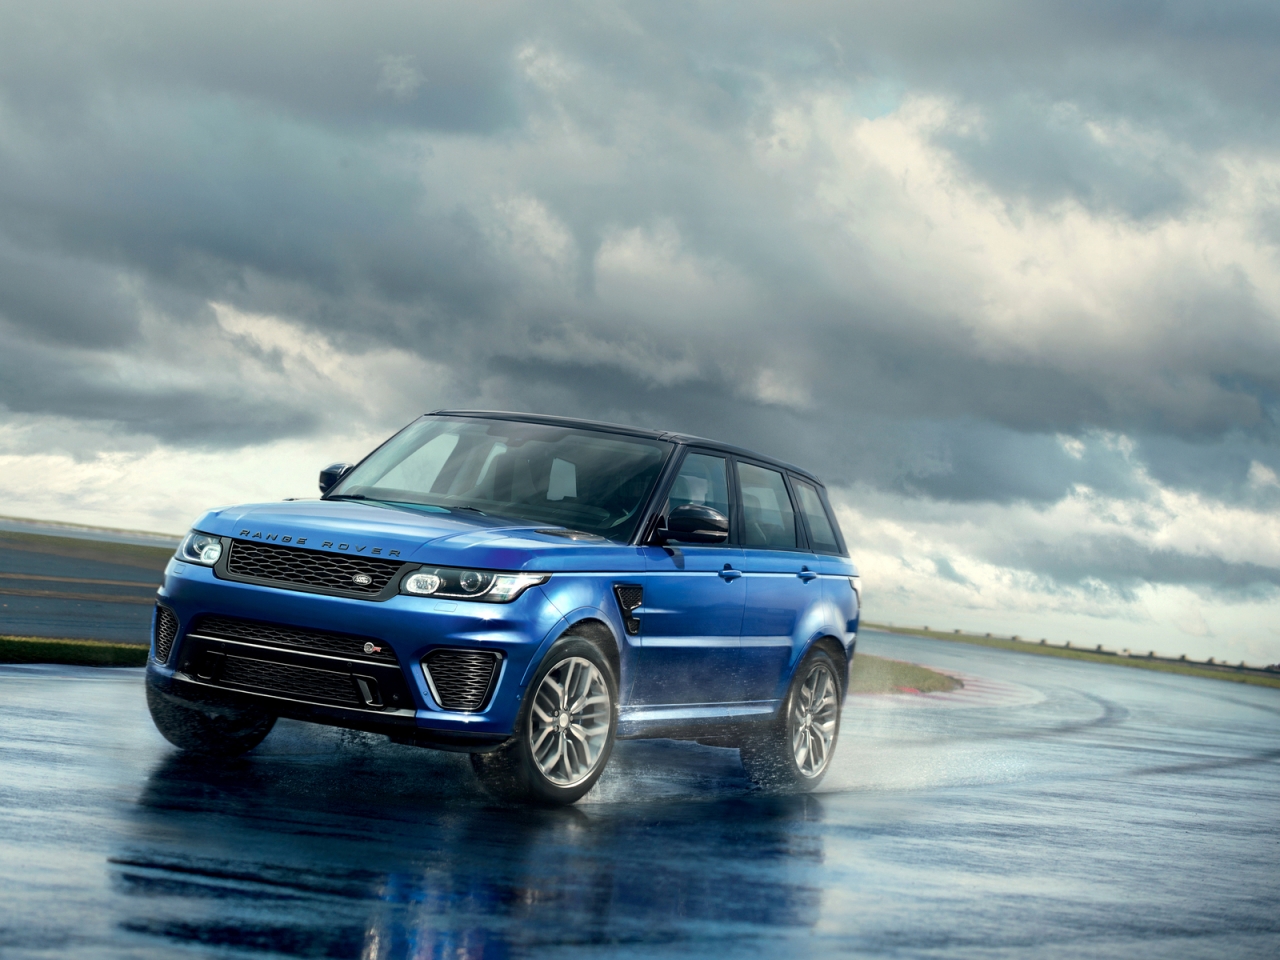 Gorgeous Blue Range Rover for 1280 x 960 resolution